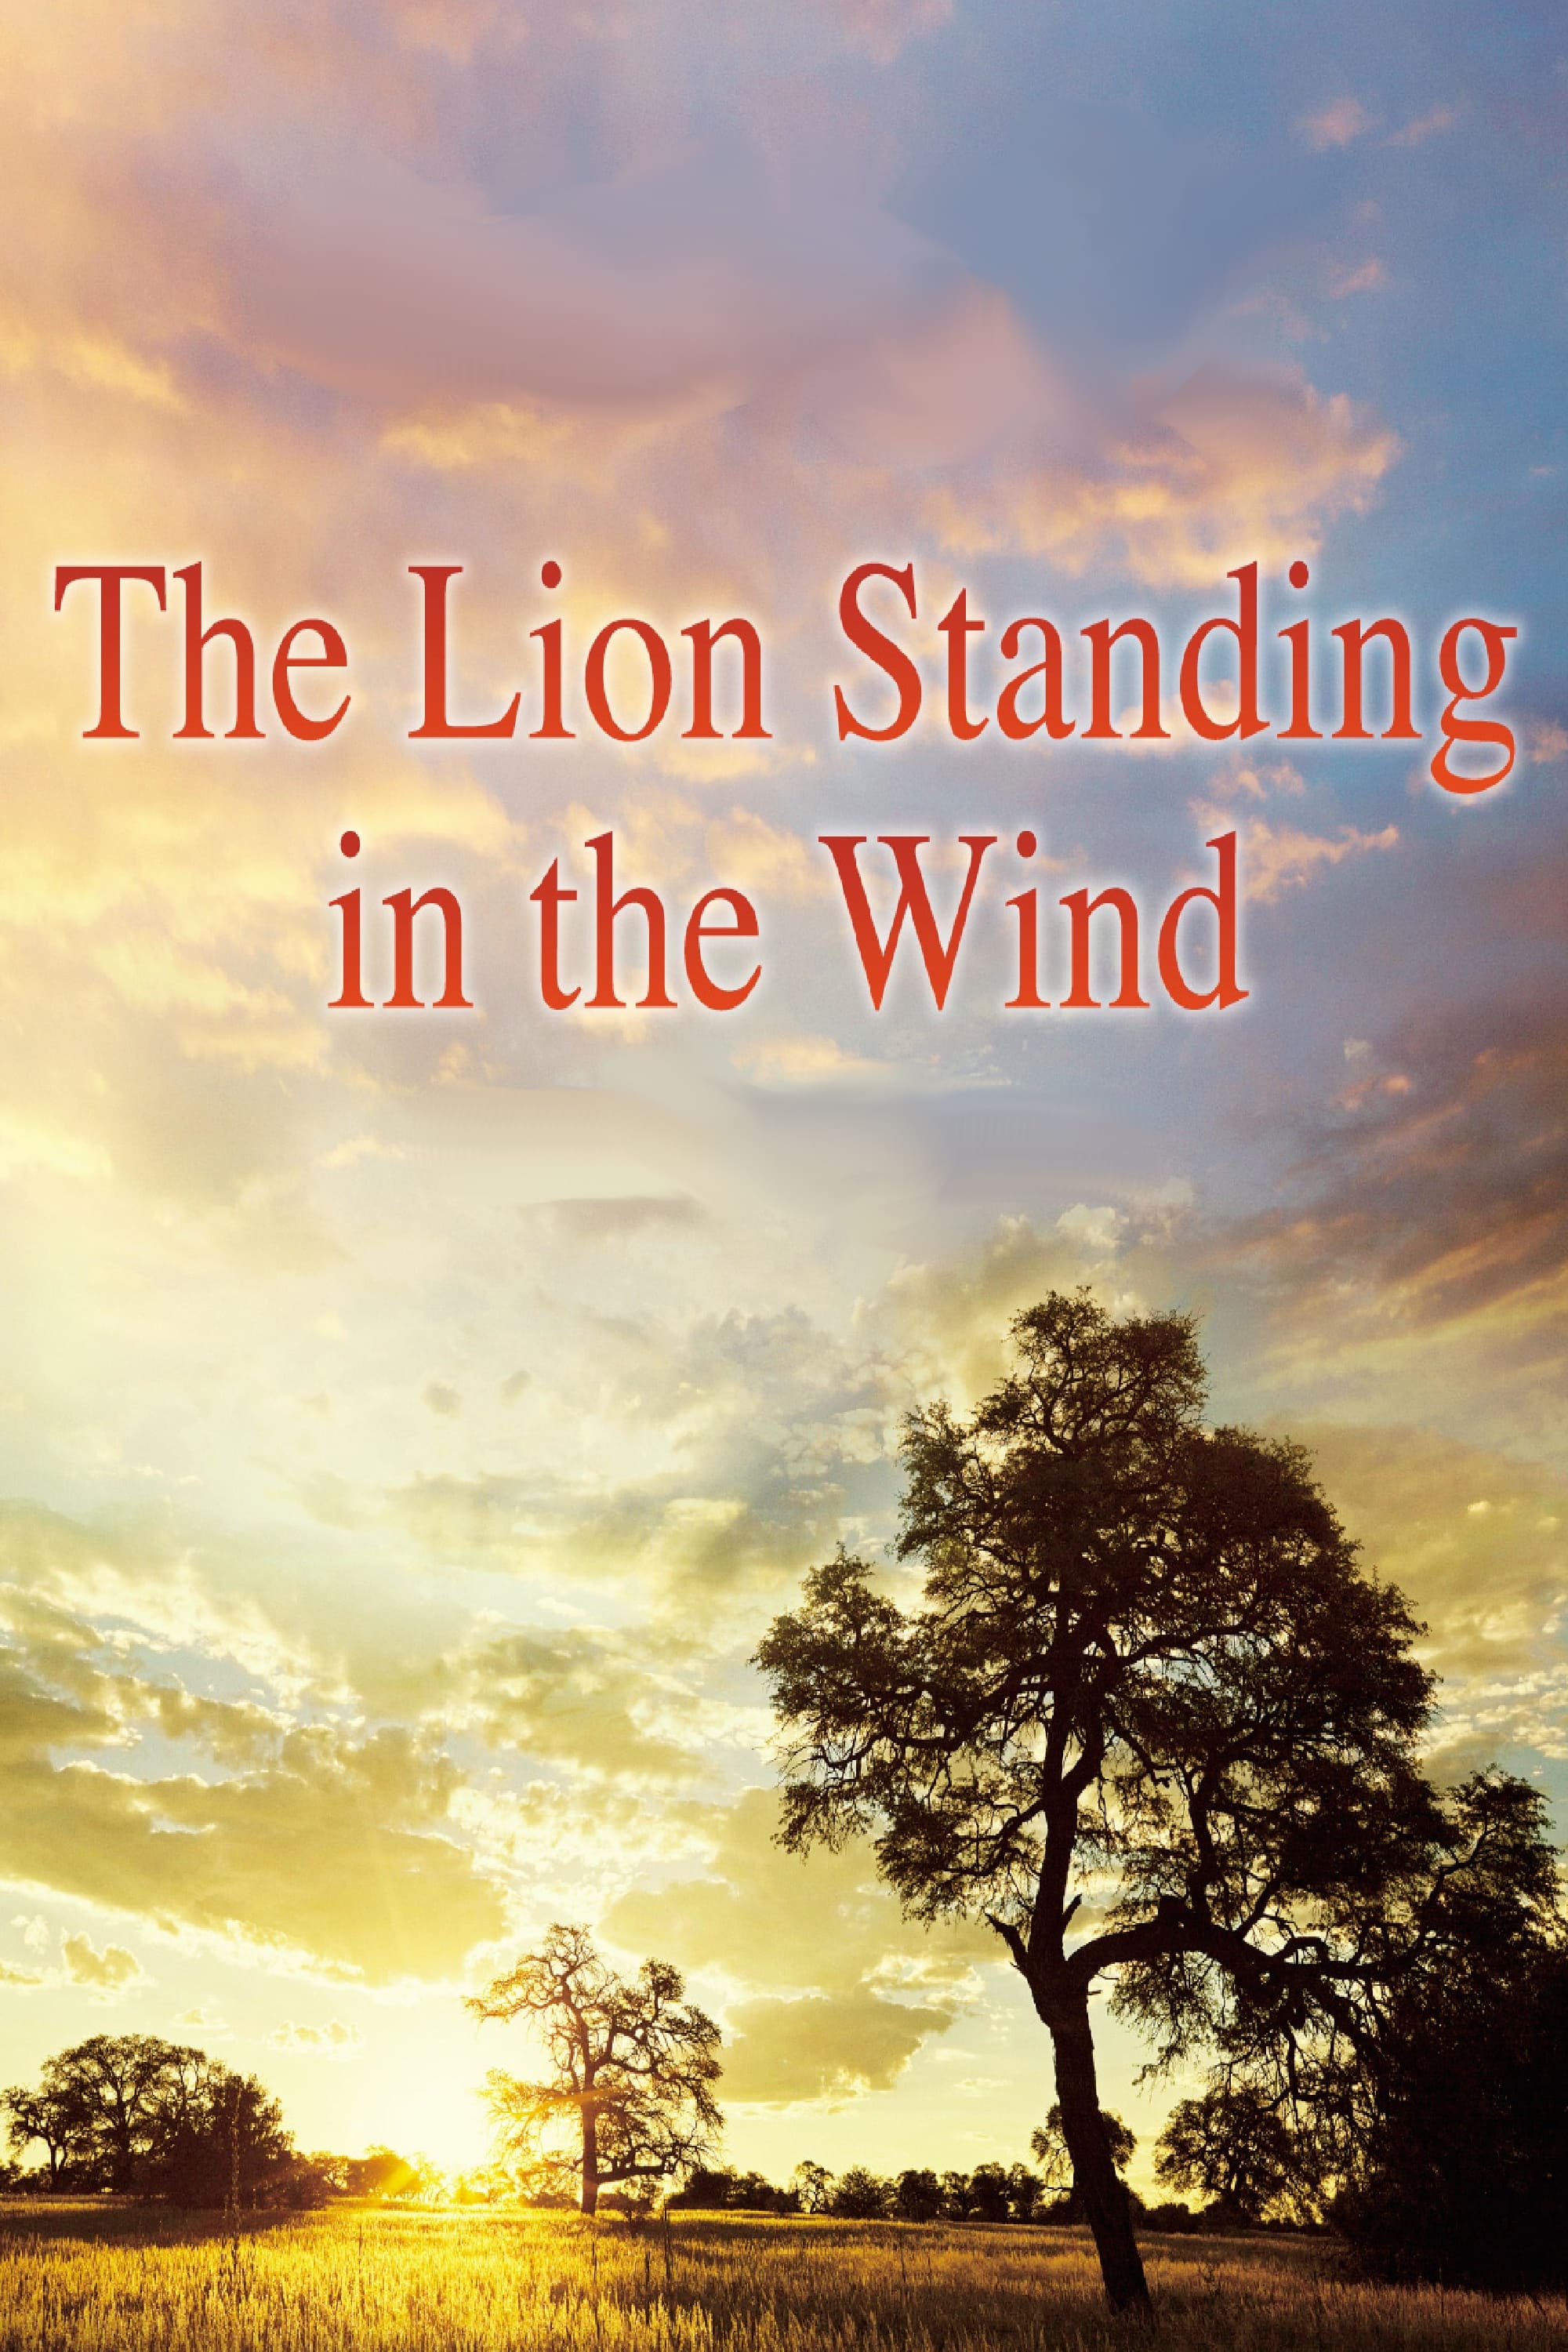 The Lion Standing in the Wind